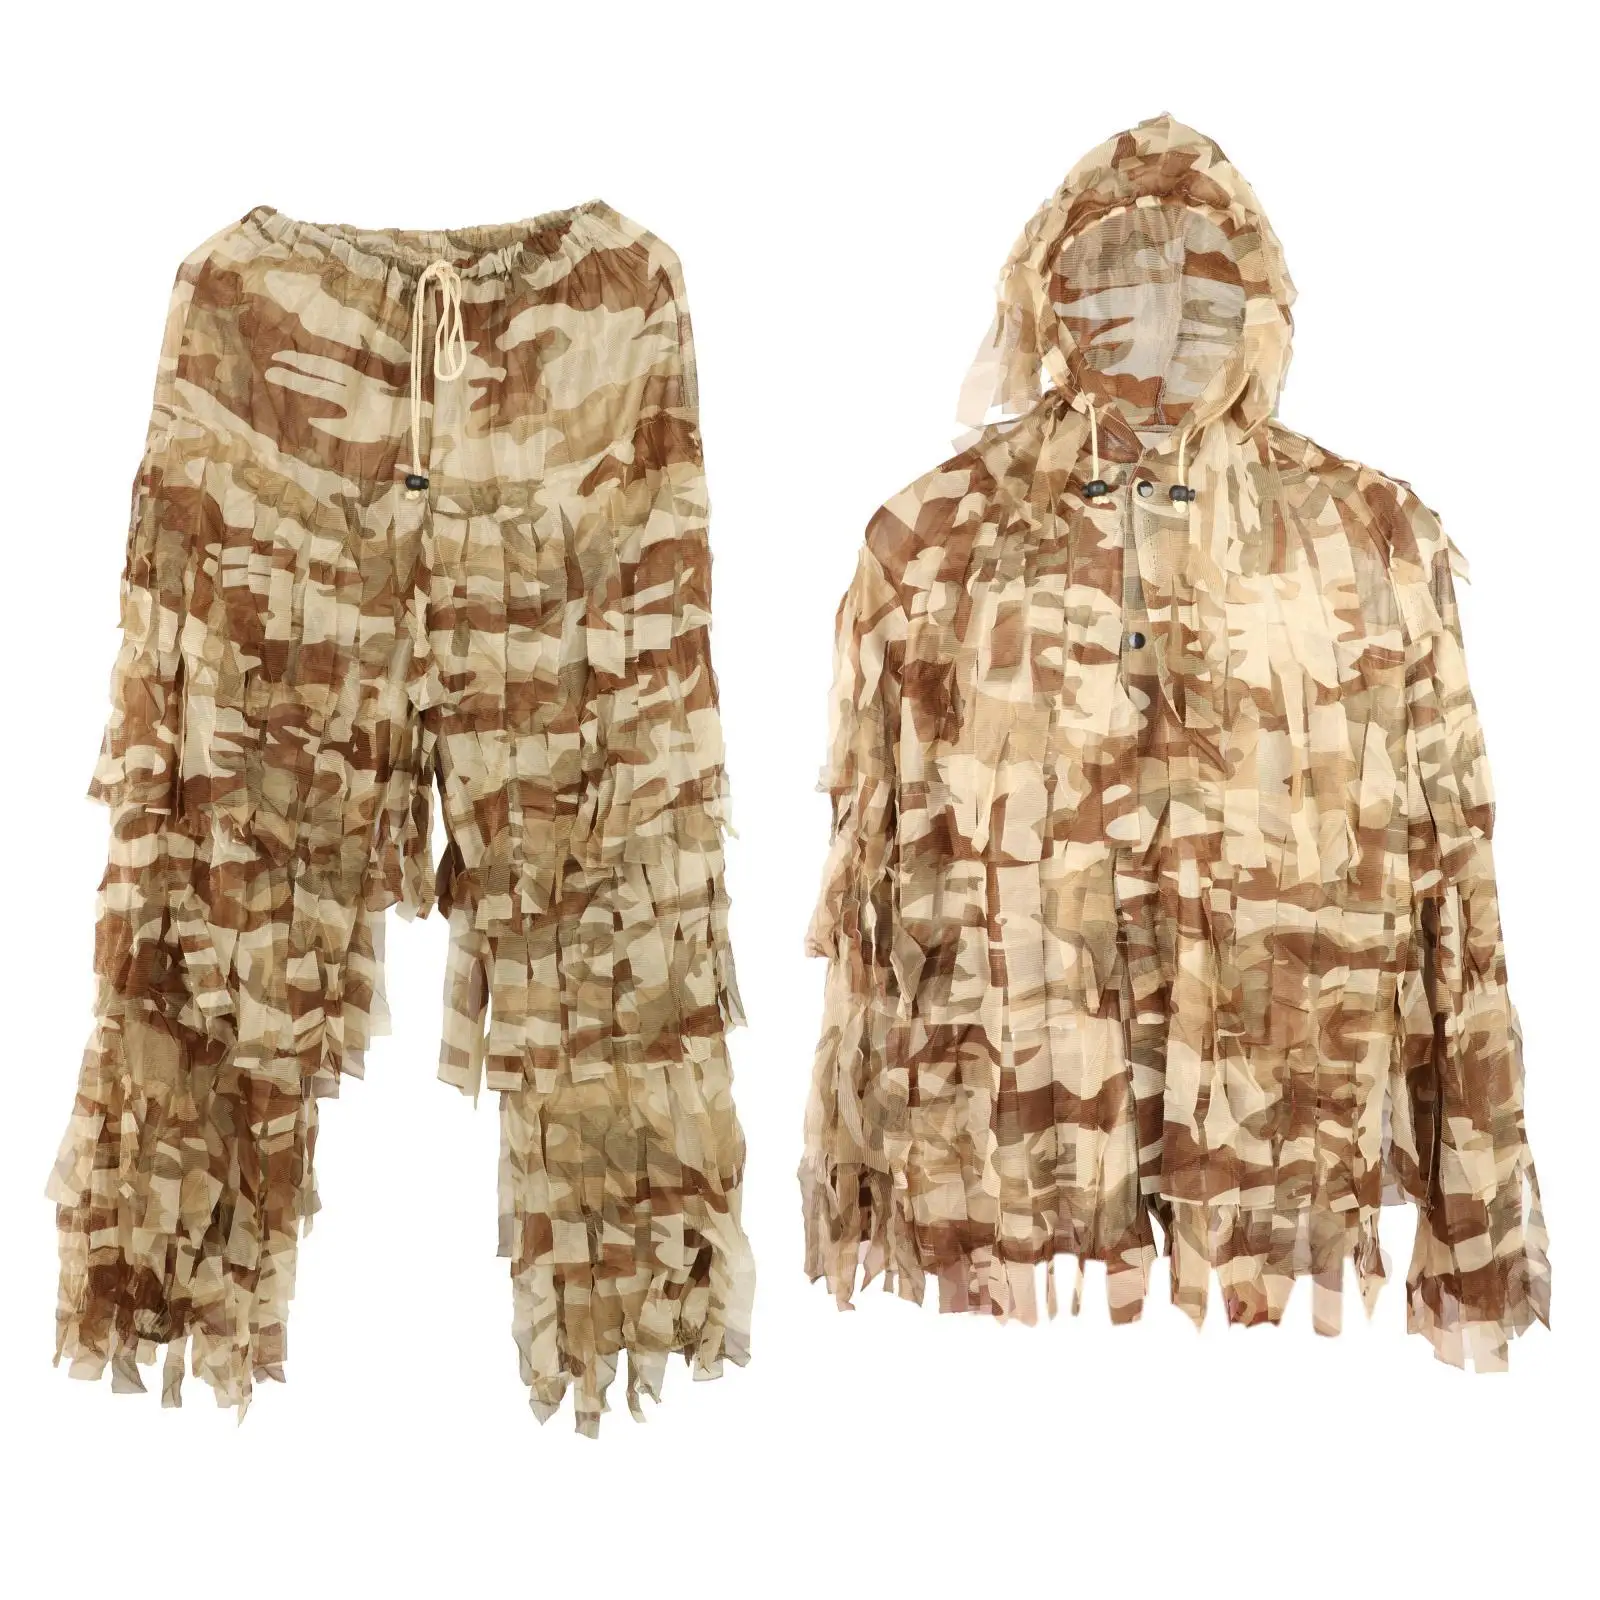  Hunting Ghillie Suit Set Woodland  Birdwatching Ghillie Suit